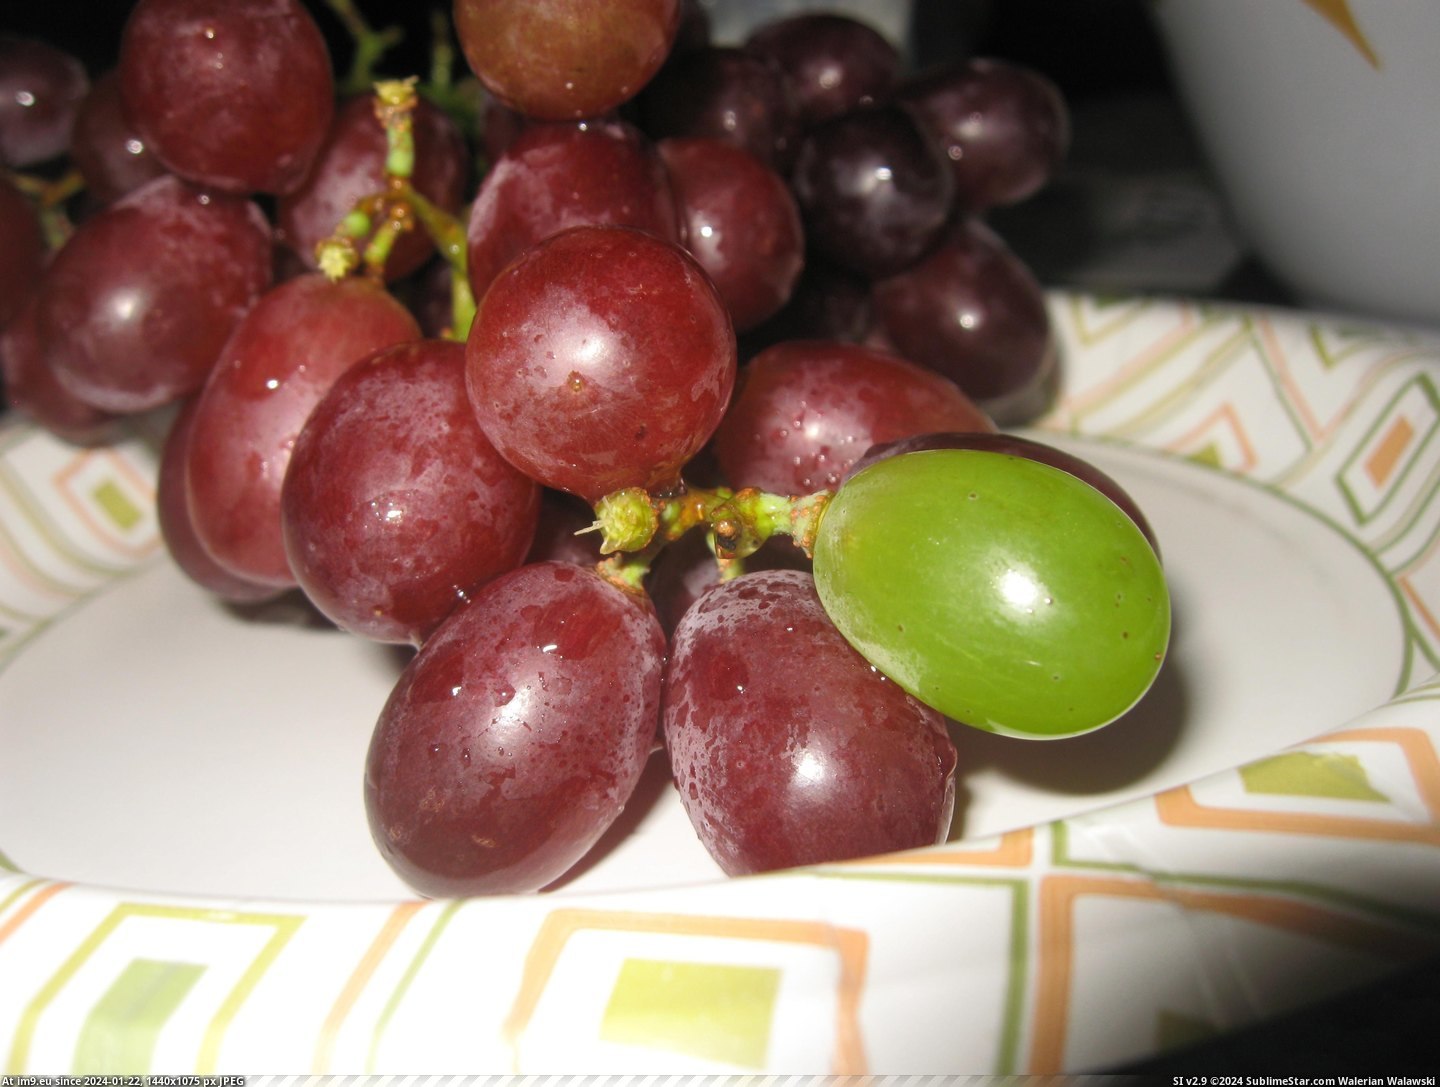 #One #Green #Grapes #Grape #Cluster #Purple #Growing [Mildlyinteresting] I found one green grape growing on a cluster of purple grapes Pic. (Obraz z album My r/MILDLYINTERESTING favs))